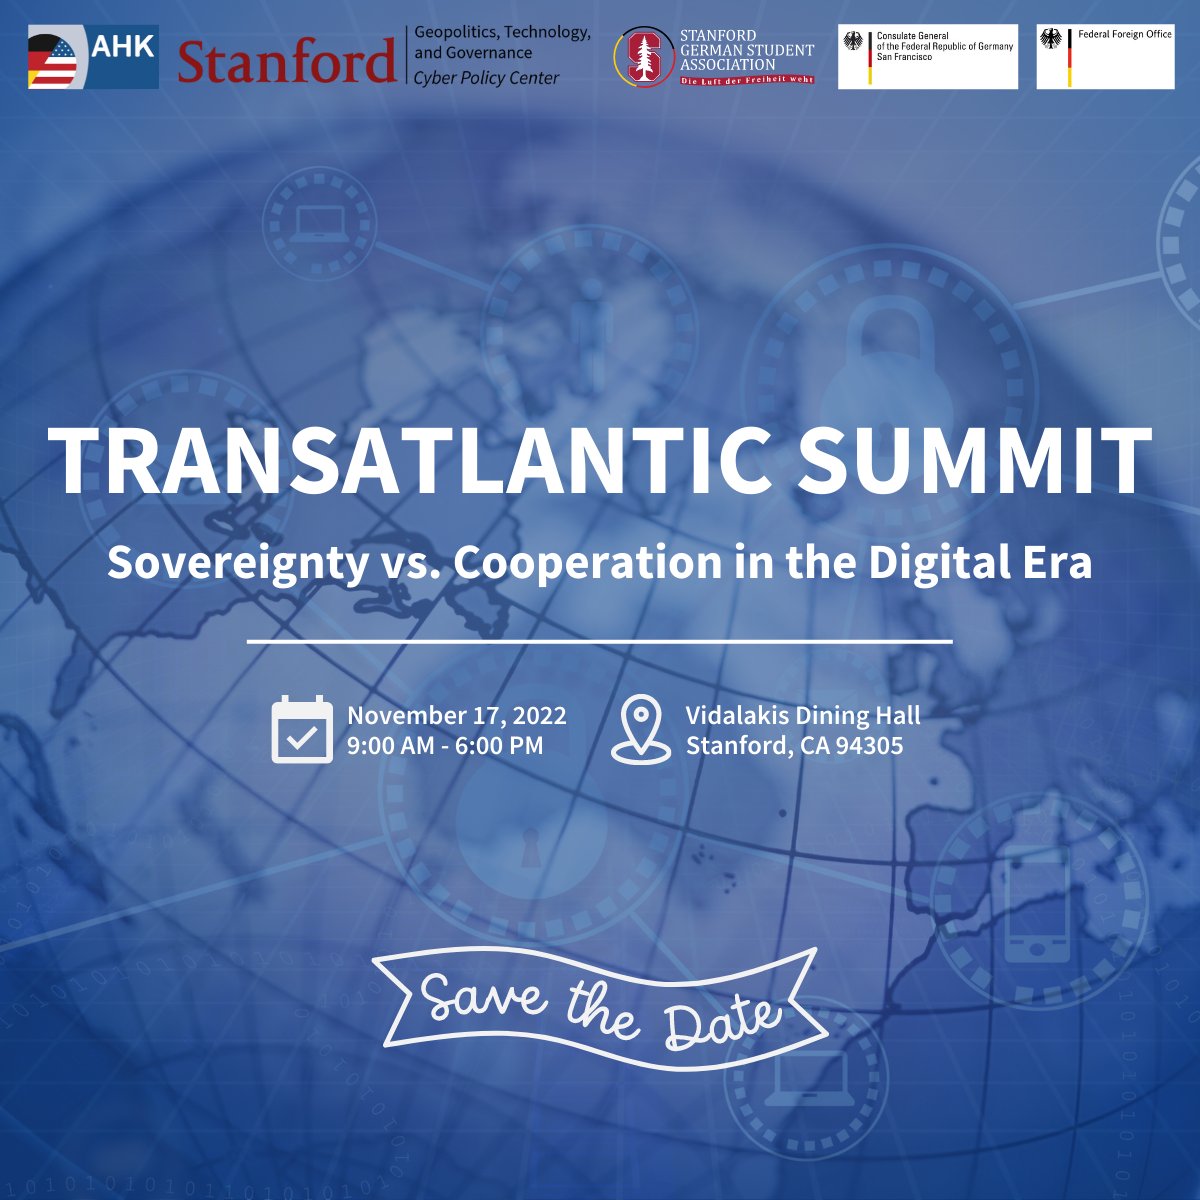 Are you interested in Digital Sovereignty, the Geopolitical Dimension of Emerging Technologies, or #Misinformation on Digital Platforms? The Transatlantic Summit 2022 will take place soon! 🔗 eventbrite.com/e/transatlanti… #transatlanticsummit2022 #geopolitics #digitalsovereignty